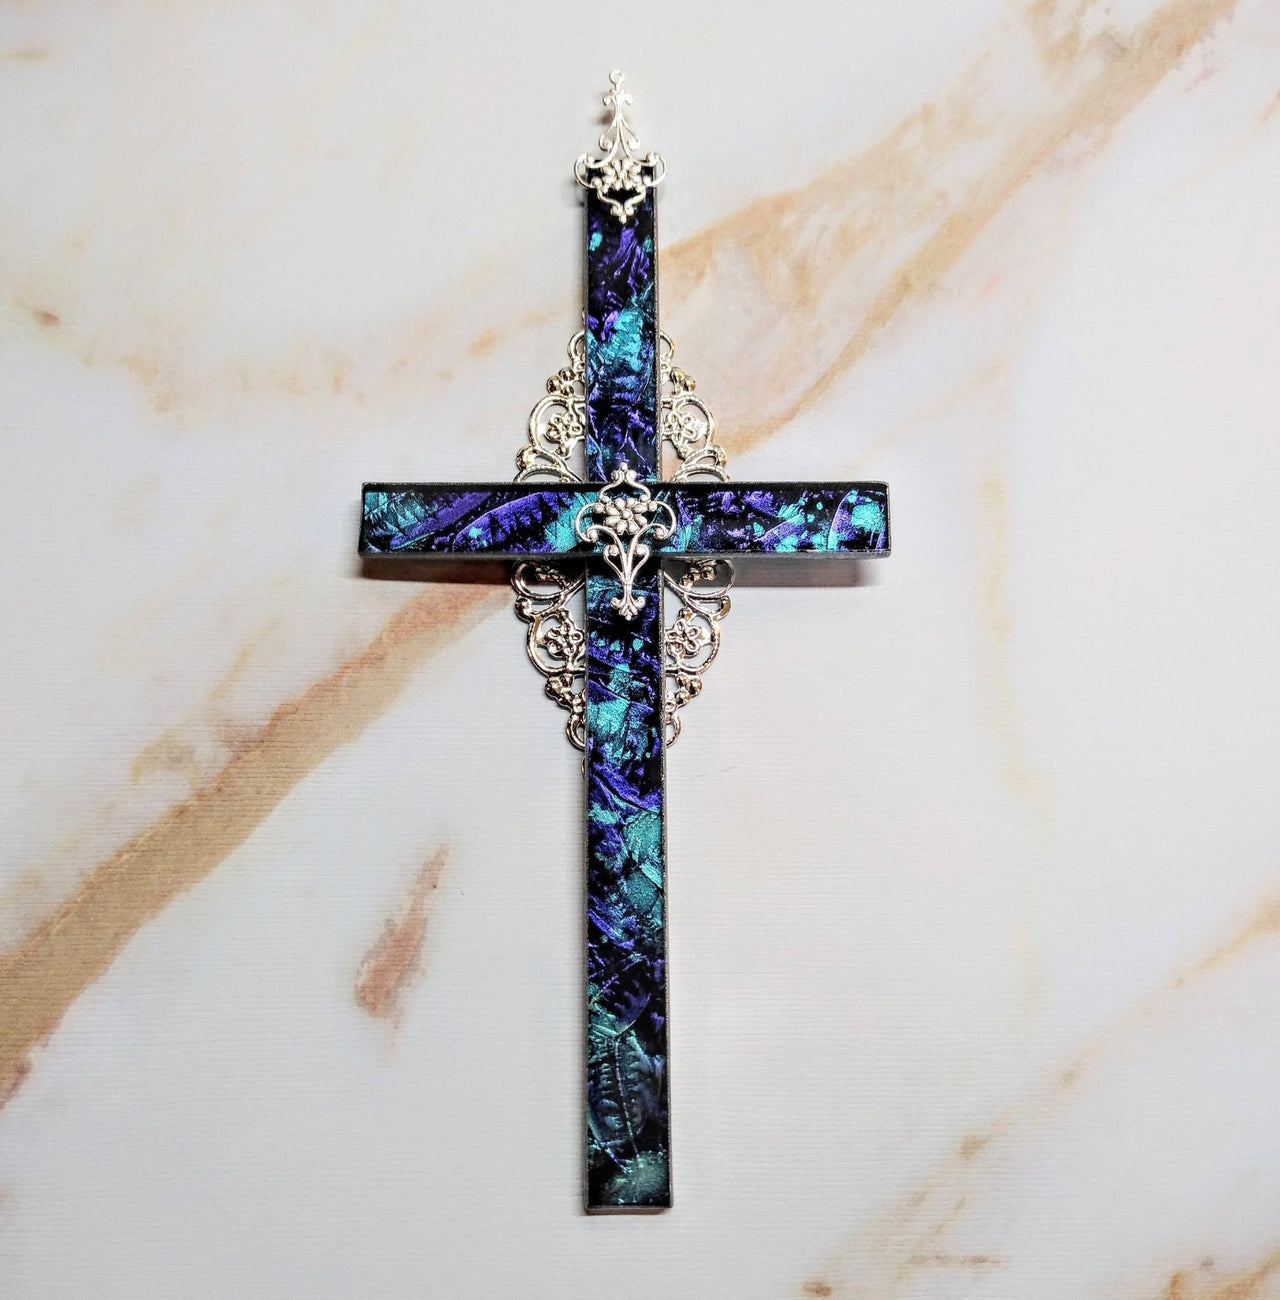 Van Gogh stained glass wall cross with lily